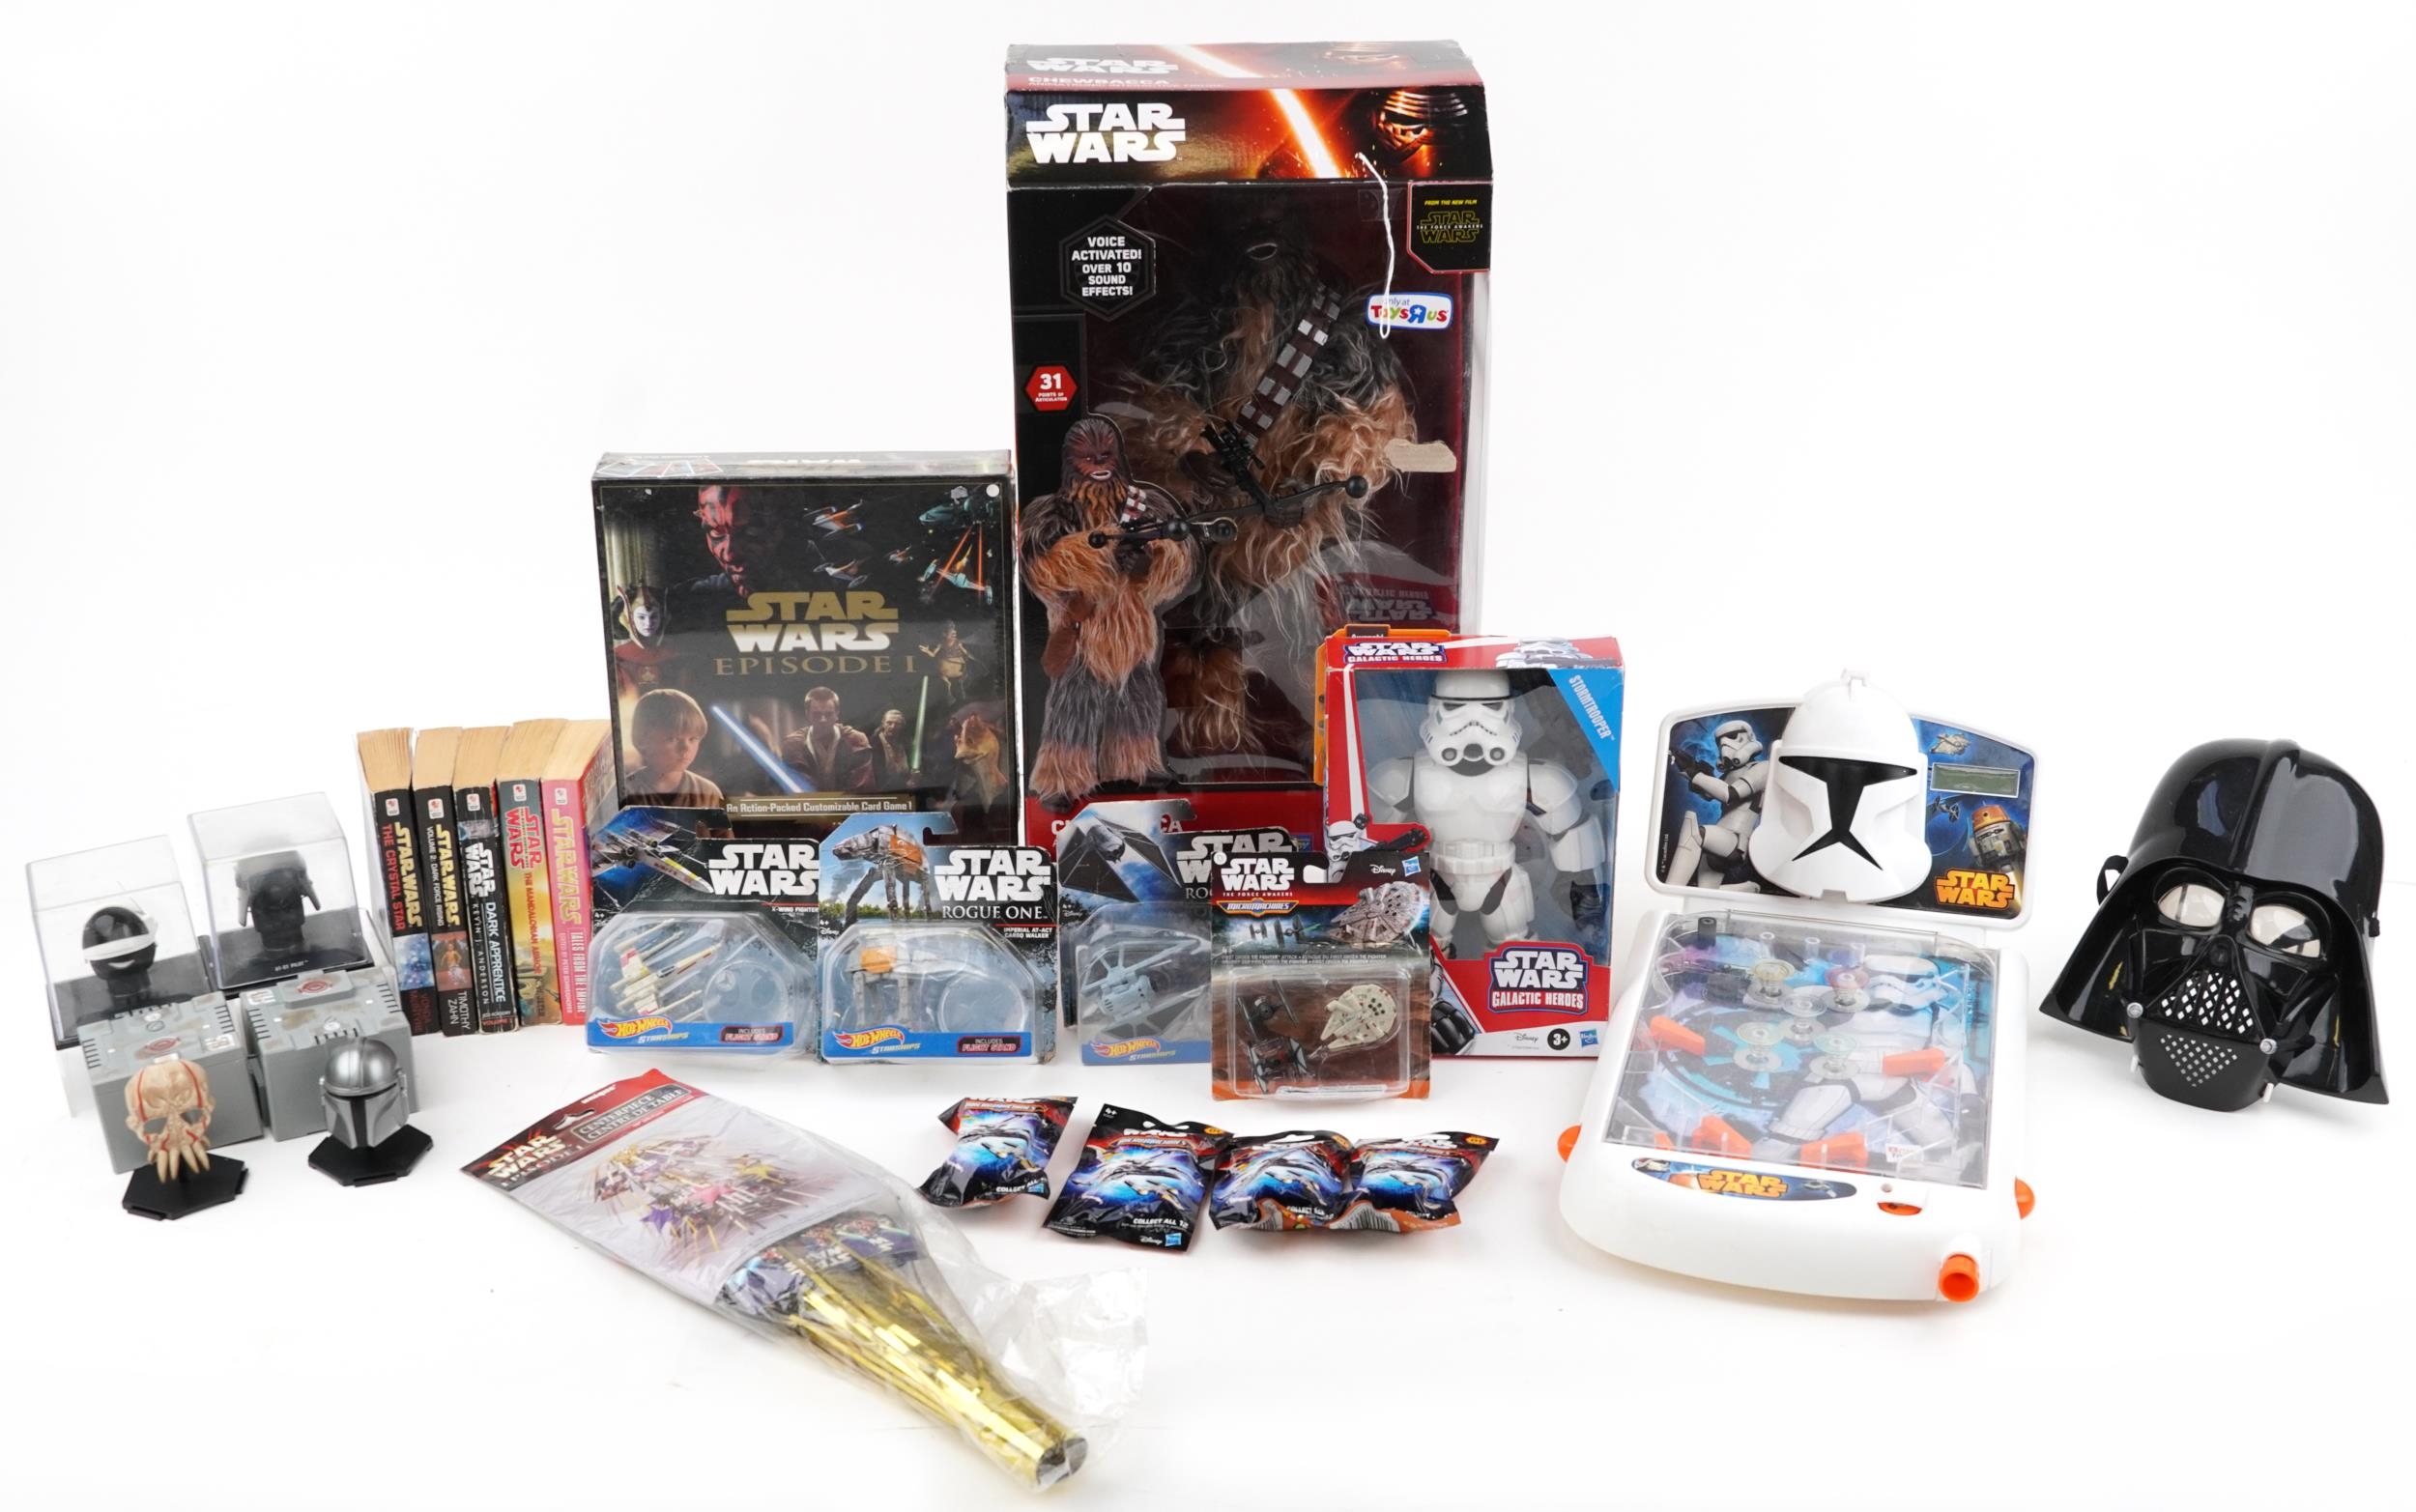 Star Wars collectables including Chewbacca Animatronic interactive figure with box and Rogue One